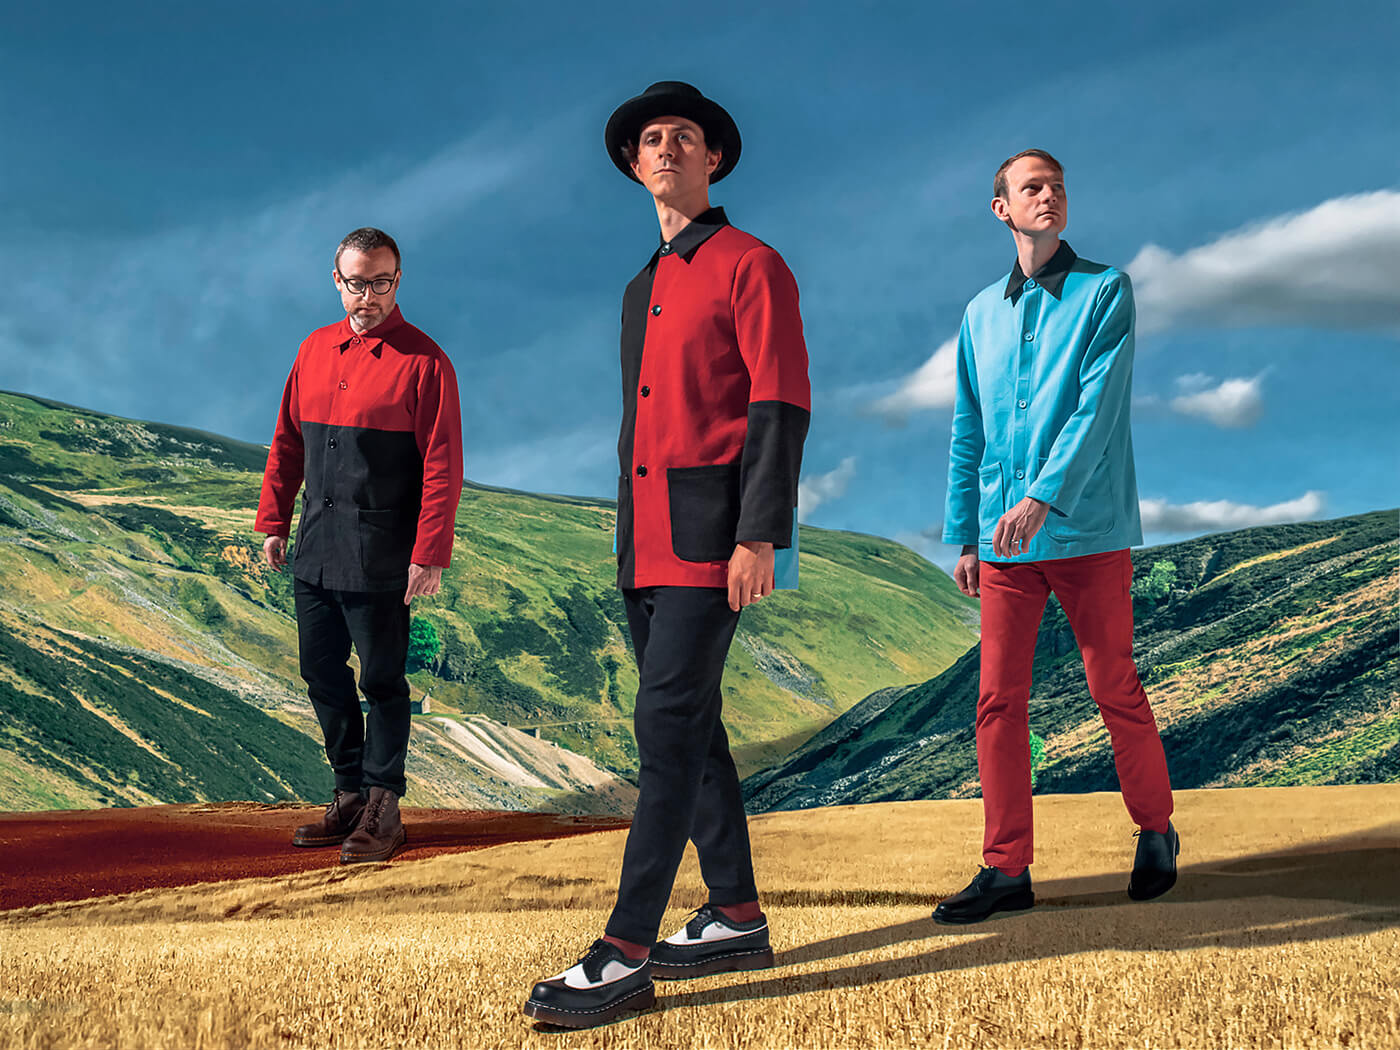 Maximo Park Wallpapers